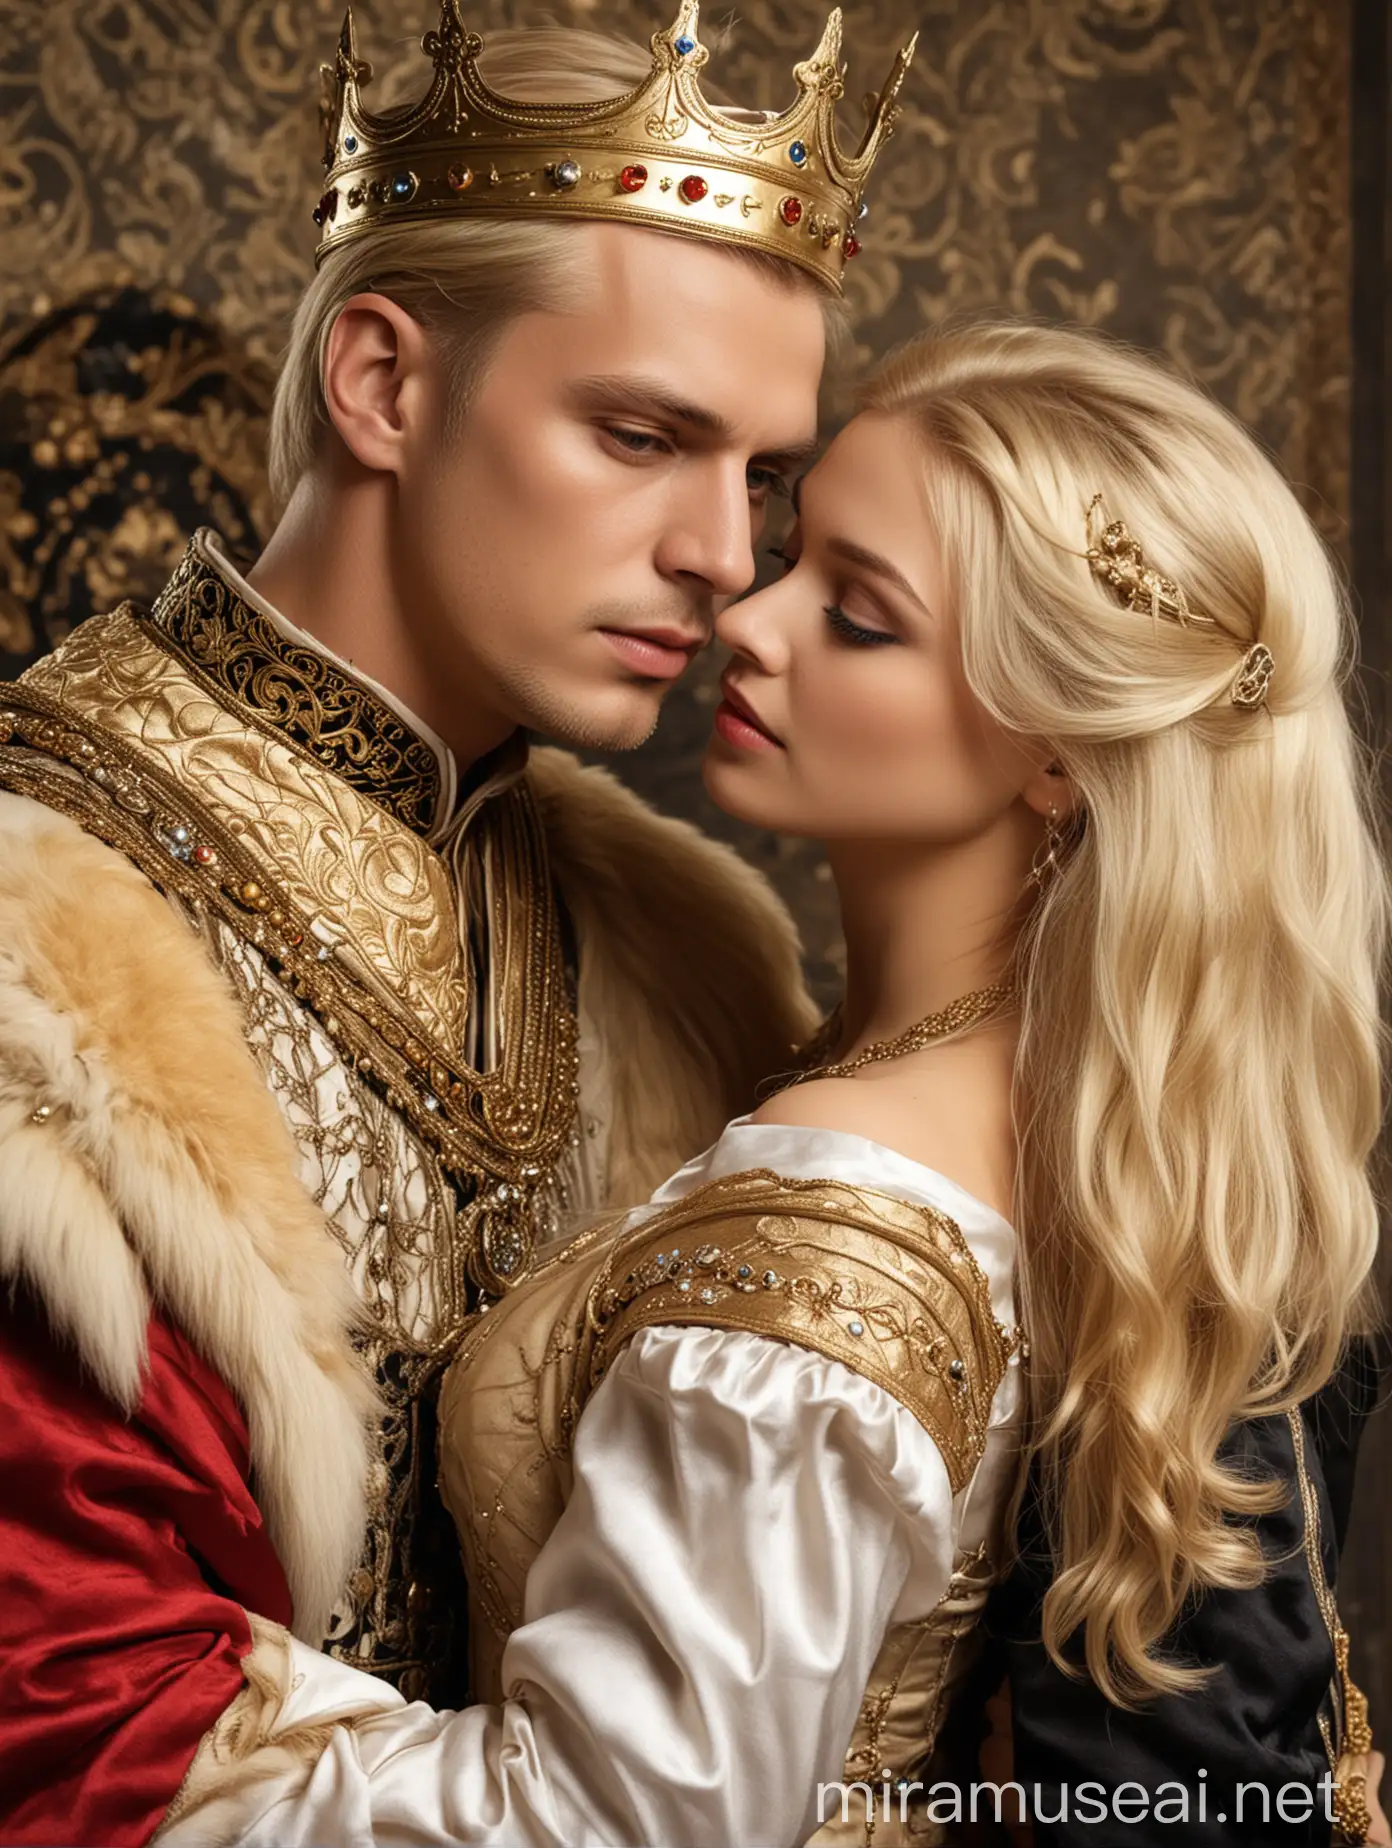 Royal Couple Young and Beautiful Blond King and Courtesan